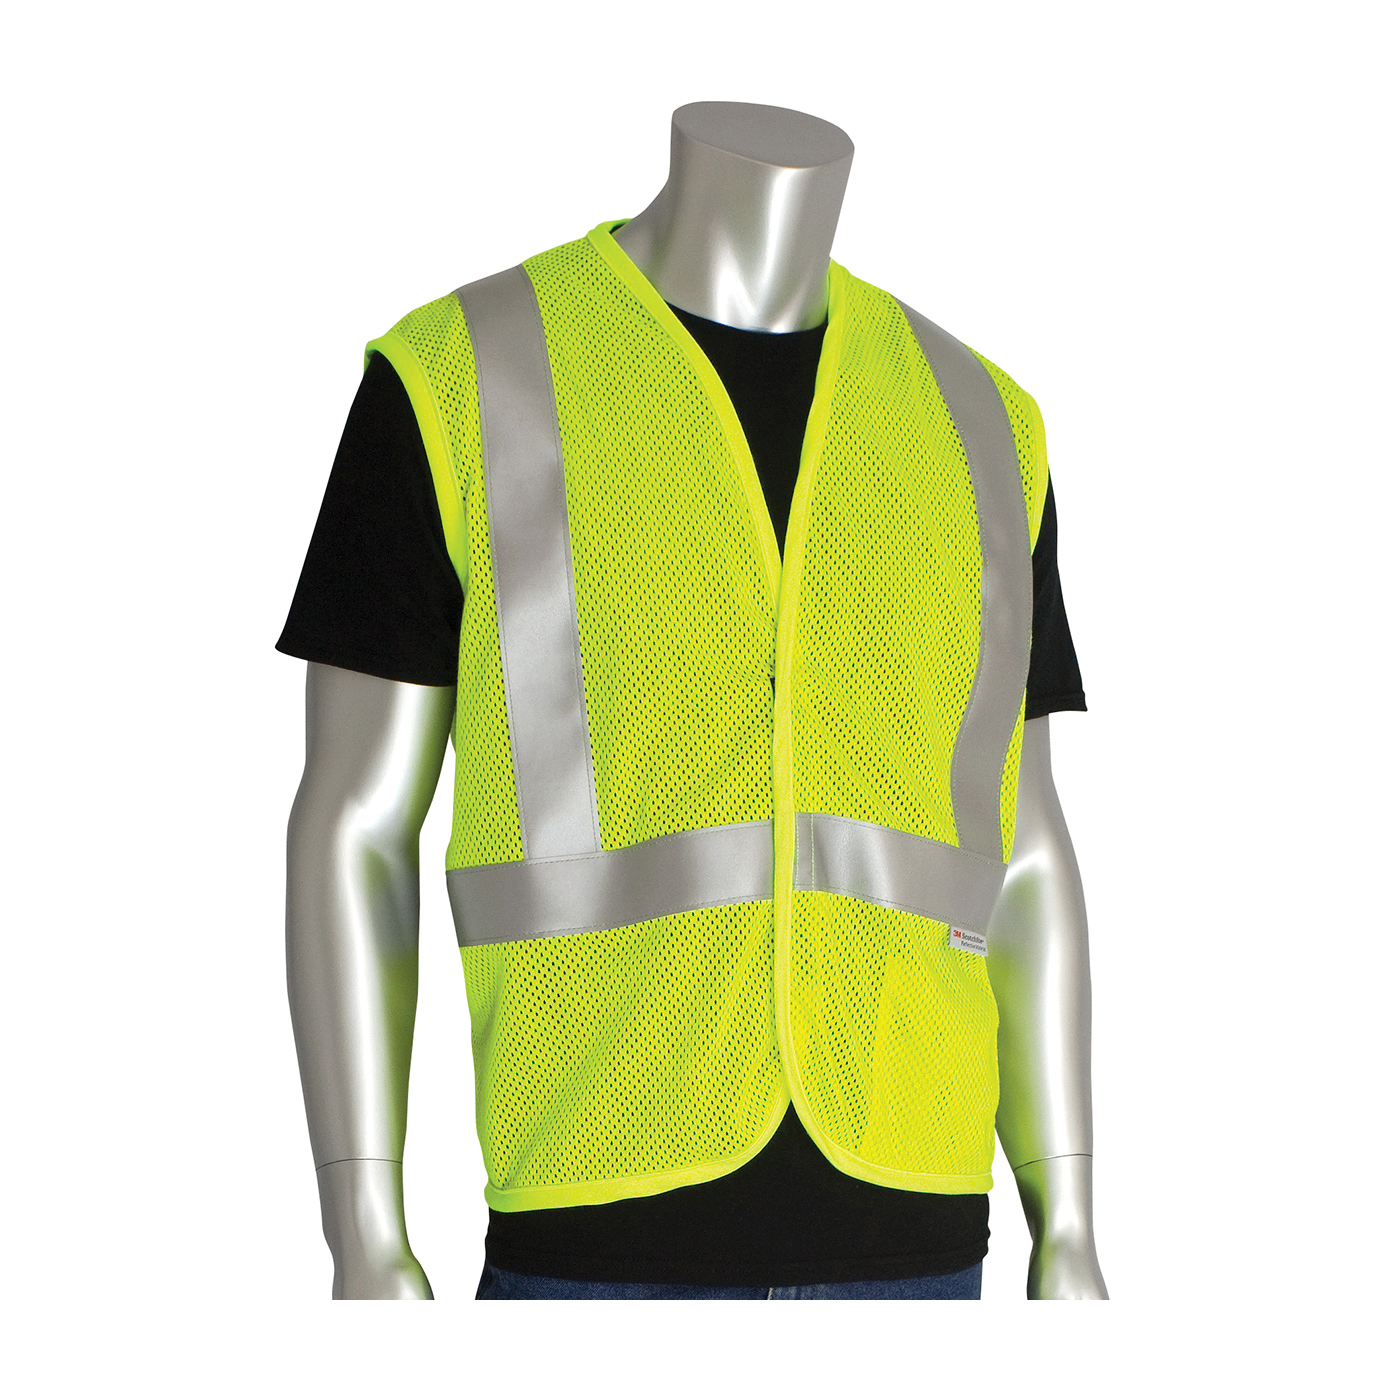 PIP® 305-2100-4X Arc and Flame Resistant Vest, 4XL, Hi-Viz Lime Yellow, Solid GlenGuard® Modacrylic/Aramid Blend Mesh Fabric, Hook and Loop Closure, 1 Pockets, ANSI Class: Class 2, Specifications Met: ANSI 107 Type R